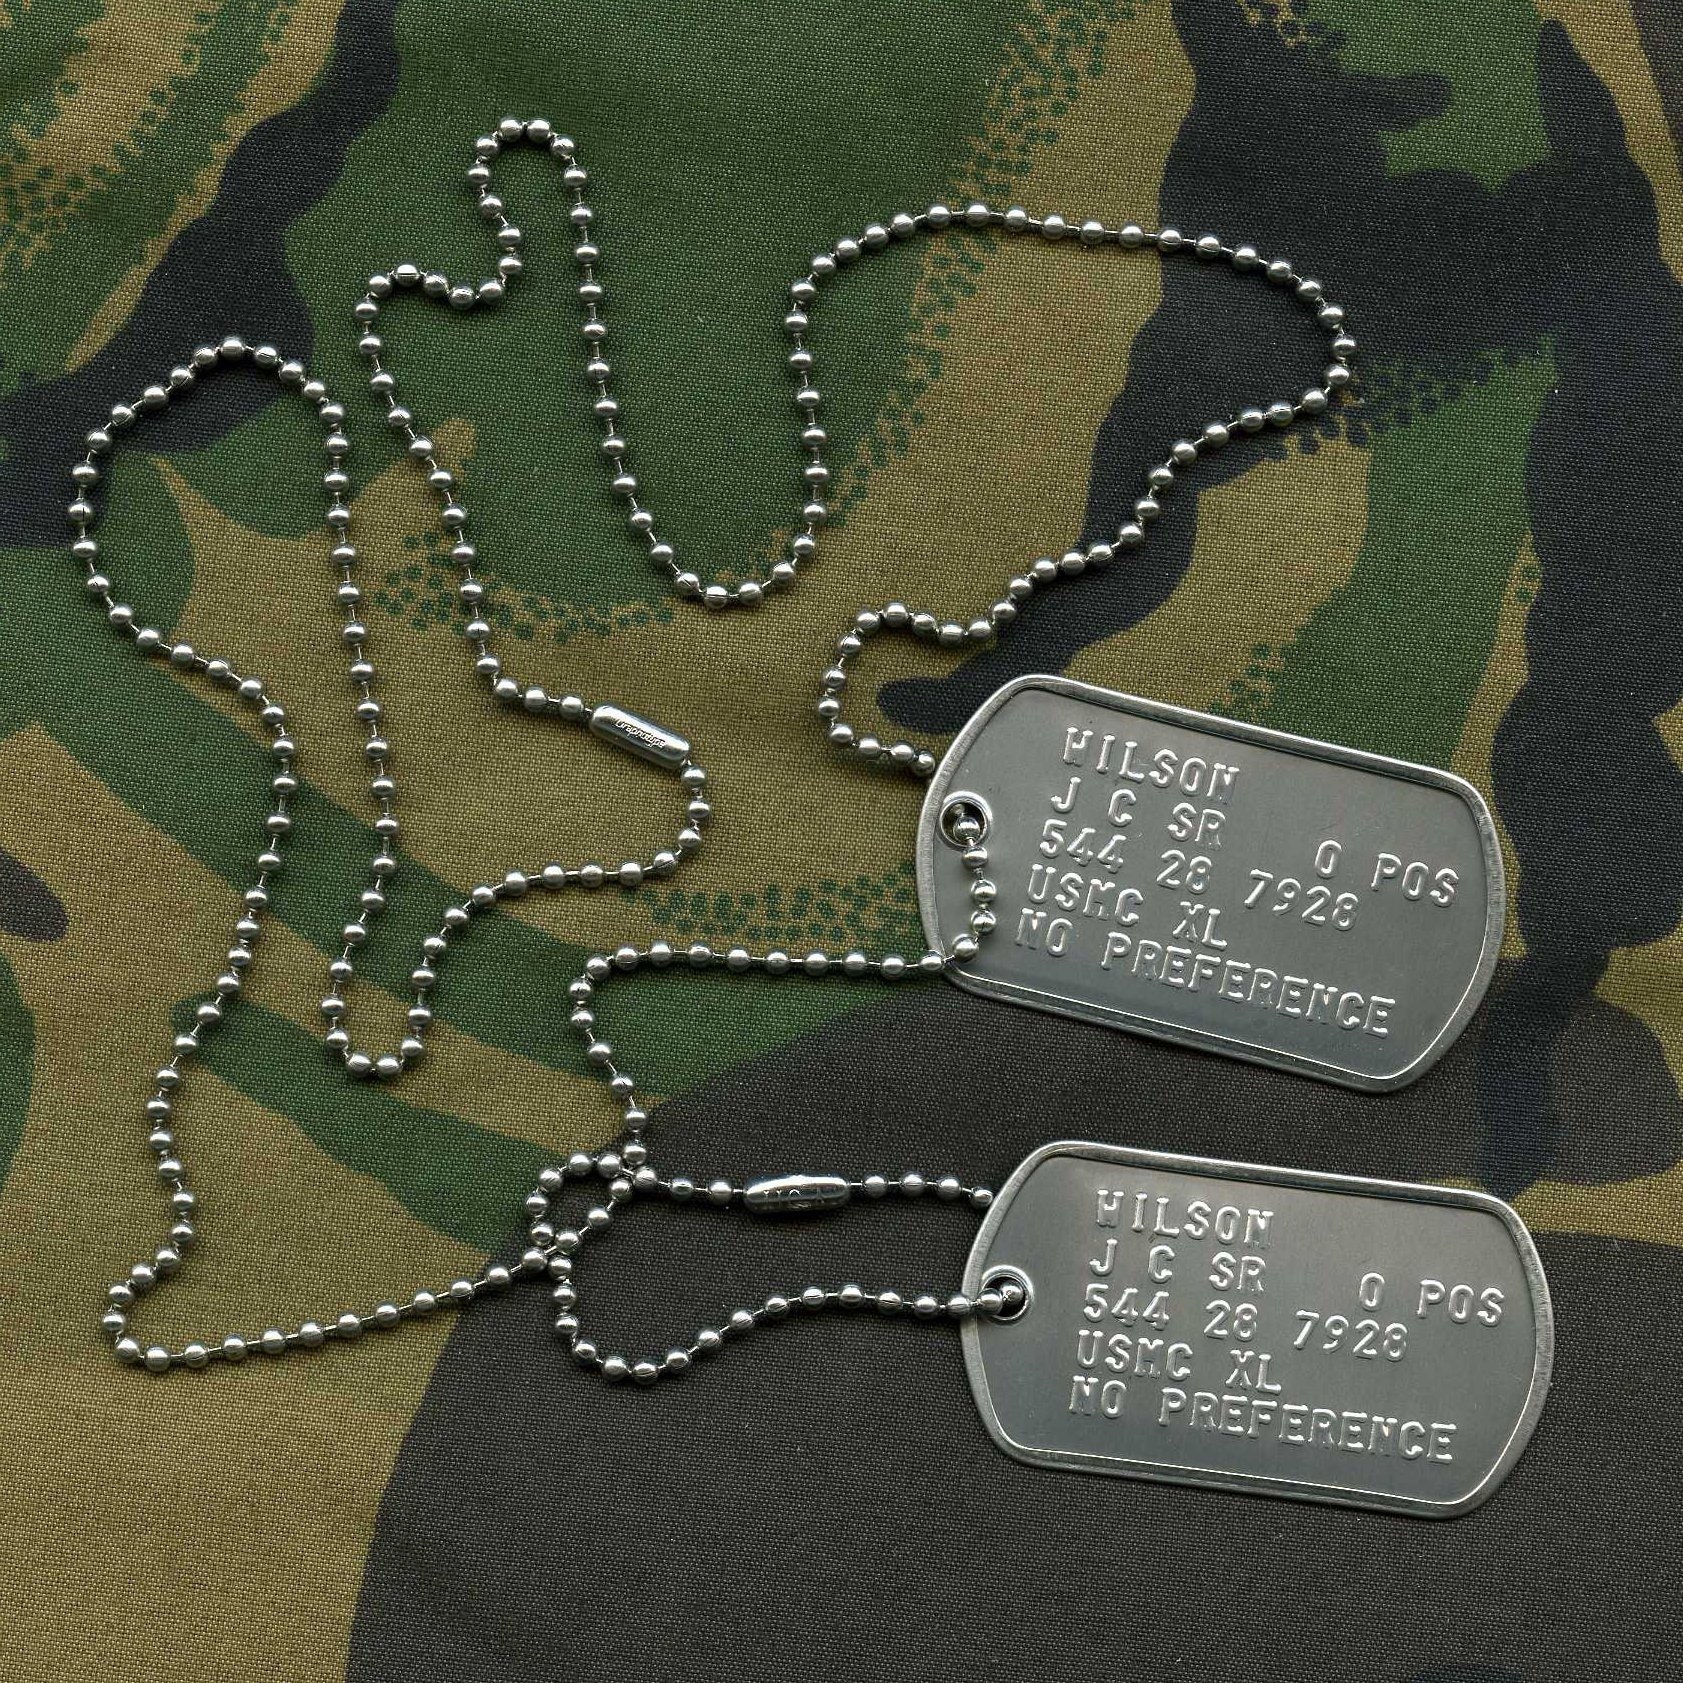 Dog Tag Chain Ungraviert Unlabeled Leather Stainless Steel Military